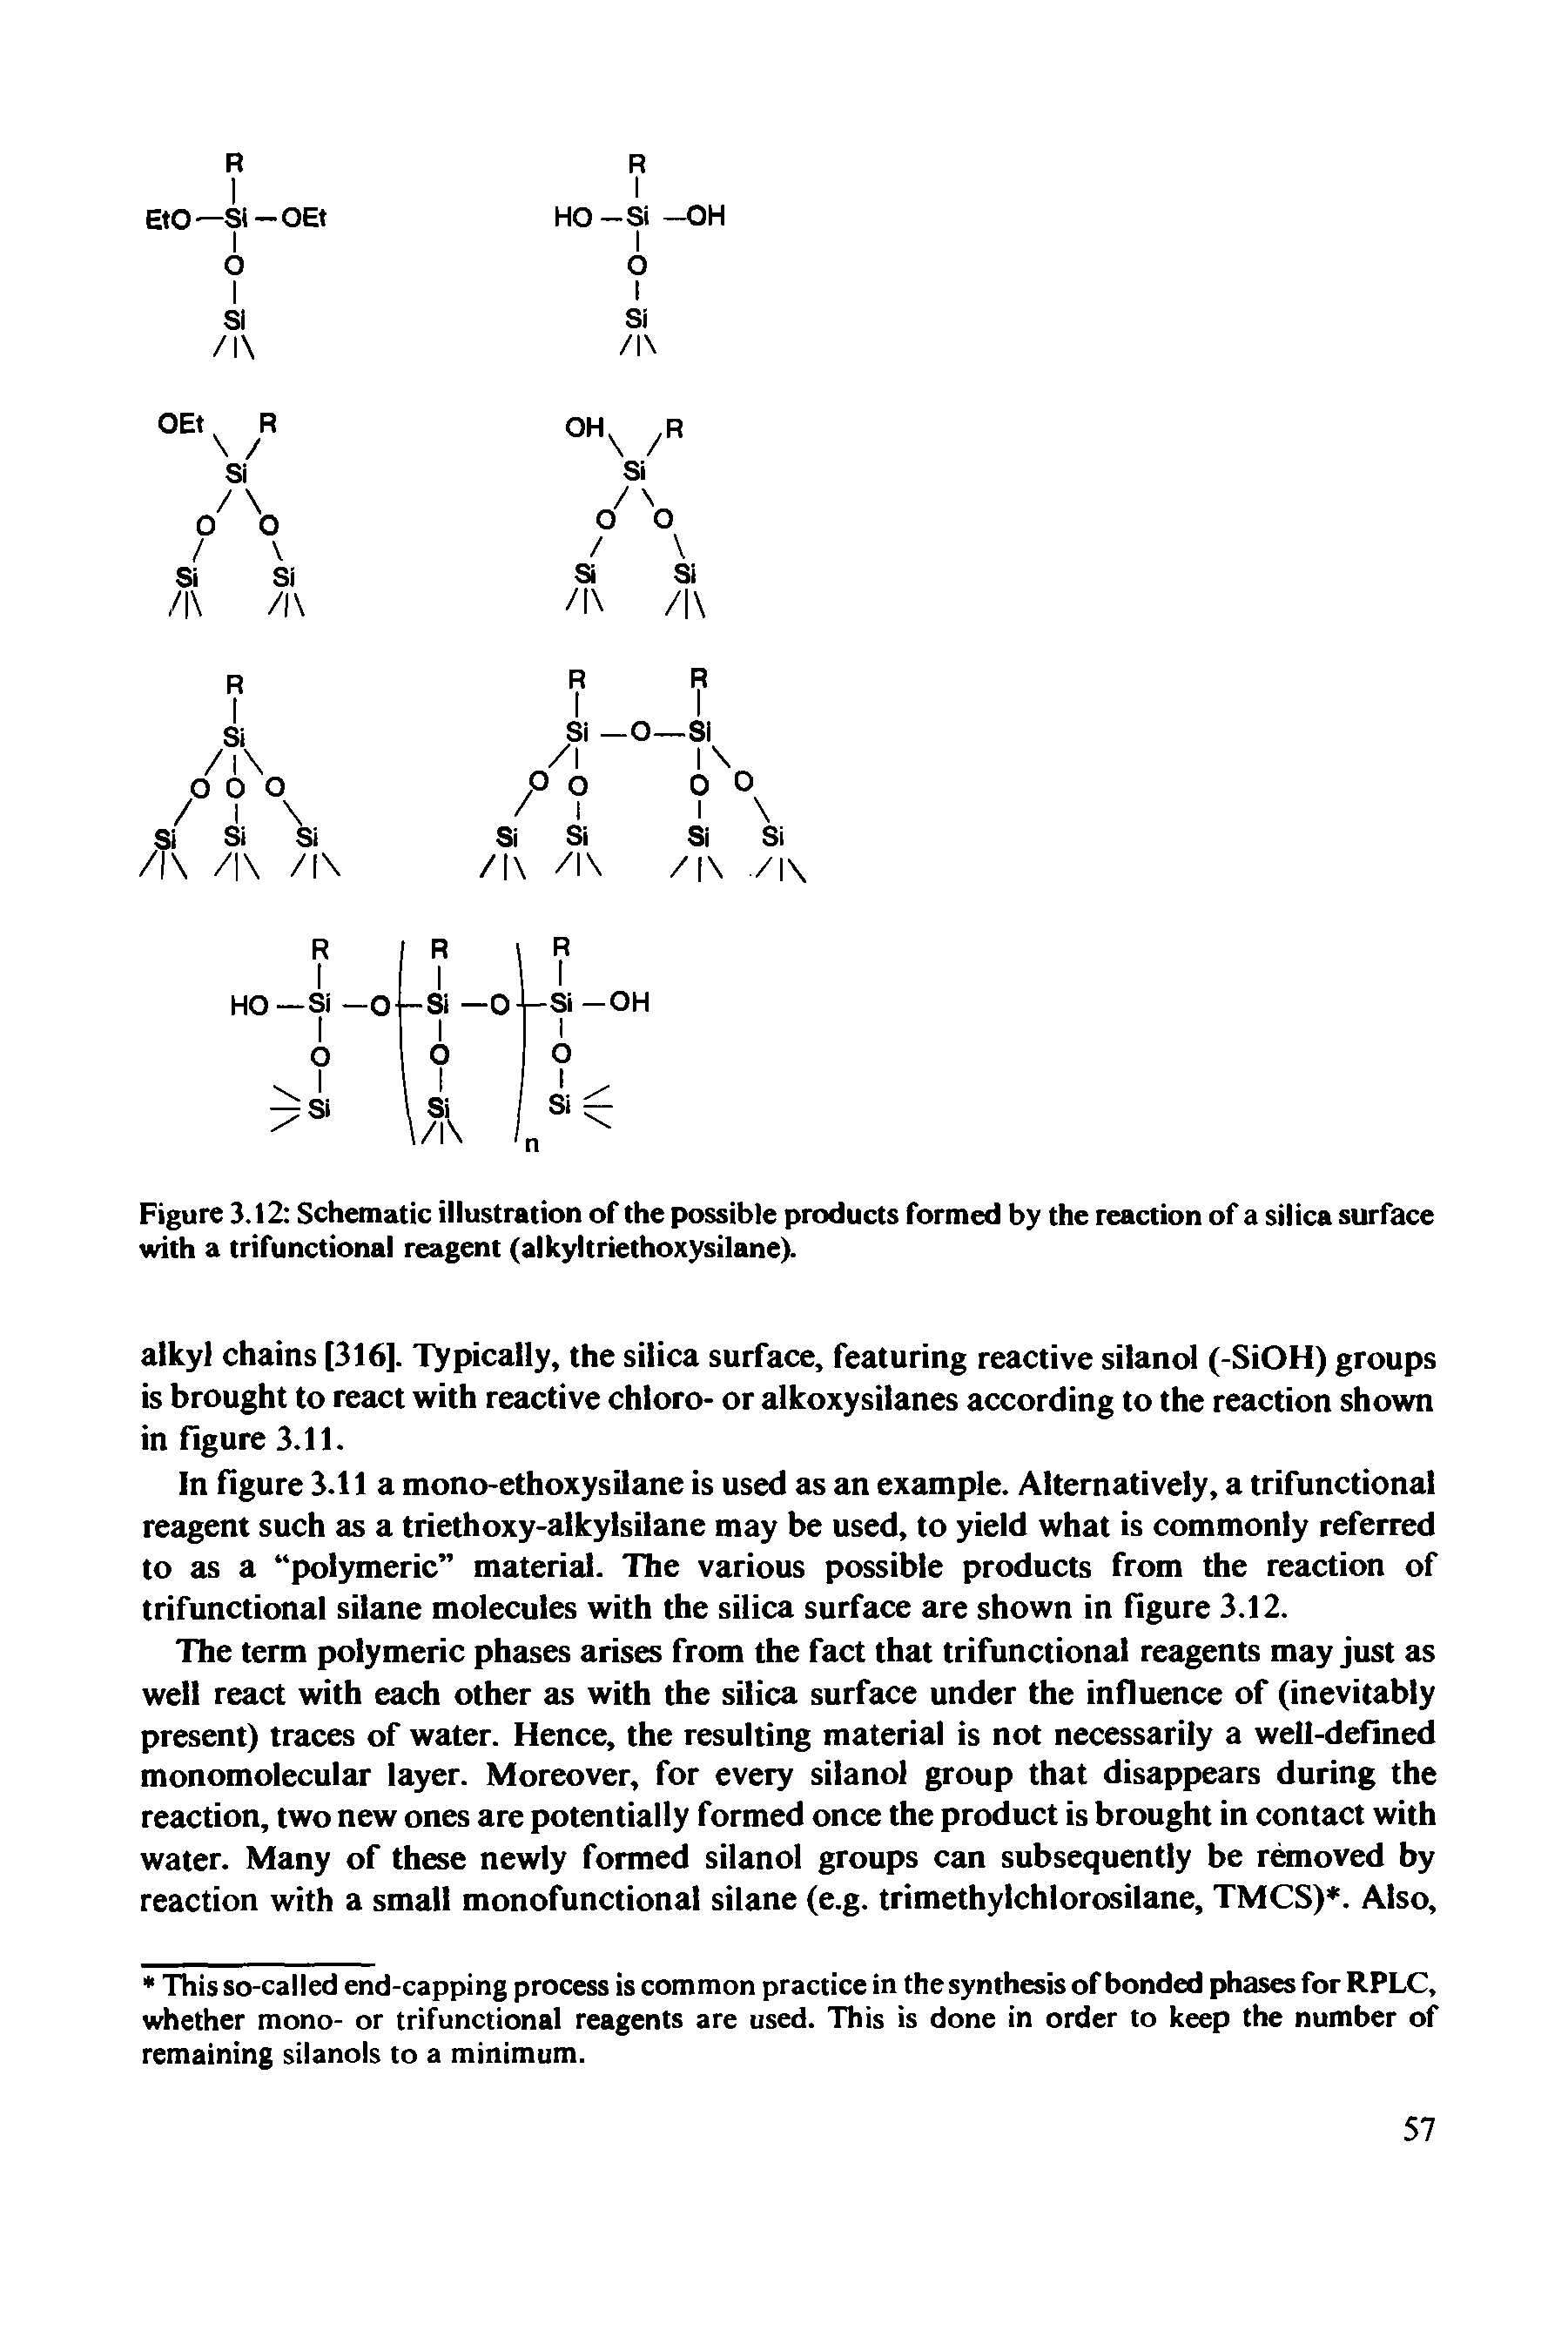 Figure 3.12 Schematic illustration of the possible products formed by the reaction of a silica surface with a trifunctional reagent (alkyltriethoxysilane).